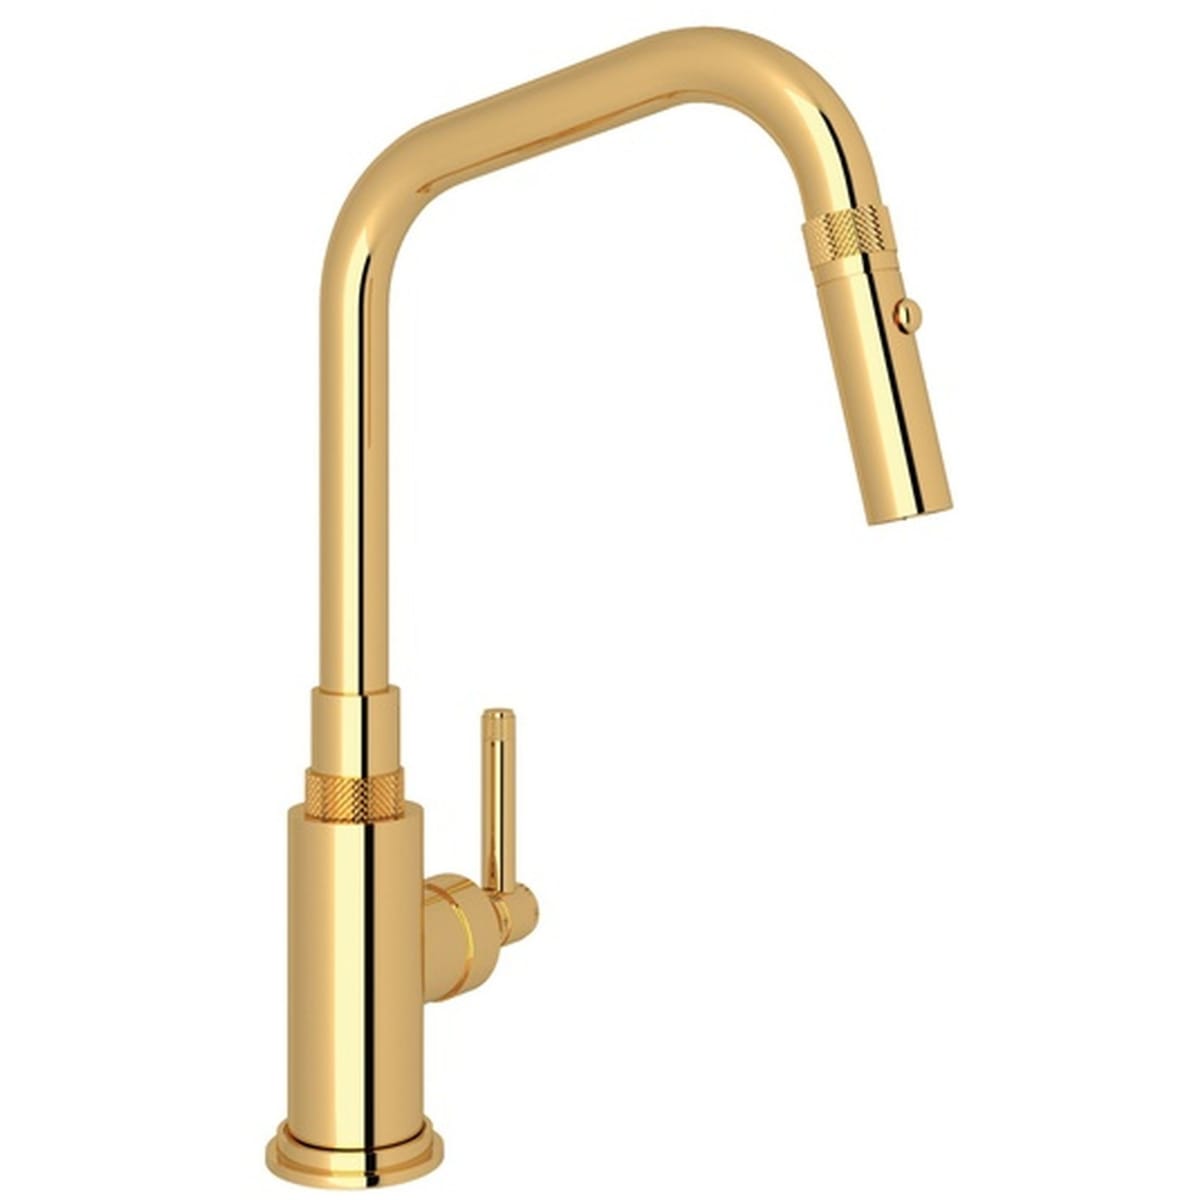 ROHL Lombardia Pulldown Kitchen Faucet - Italian Brass with Metal Lever  Handle